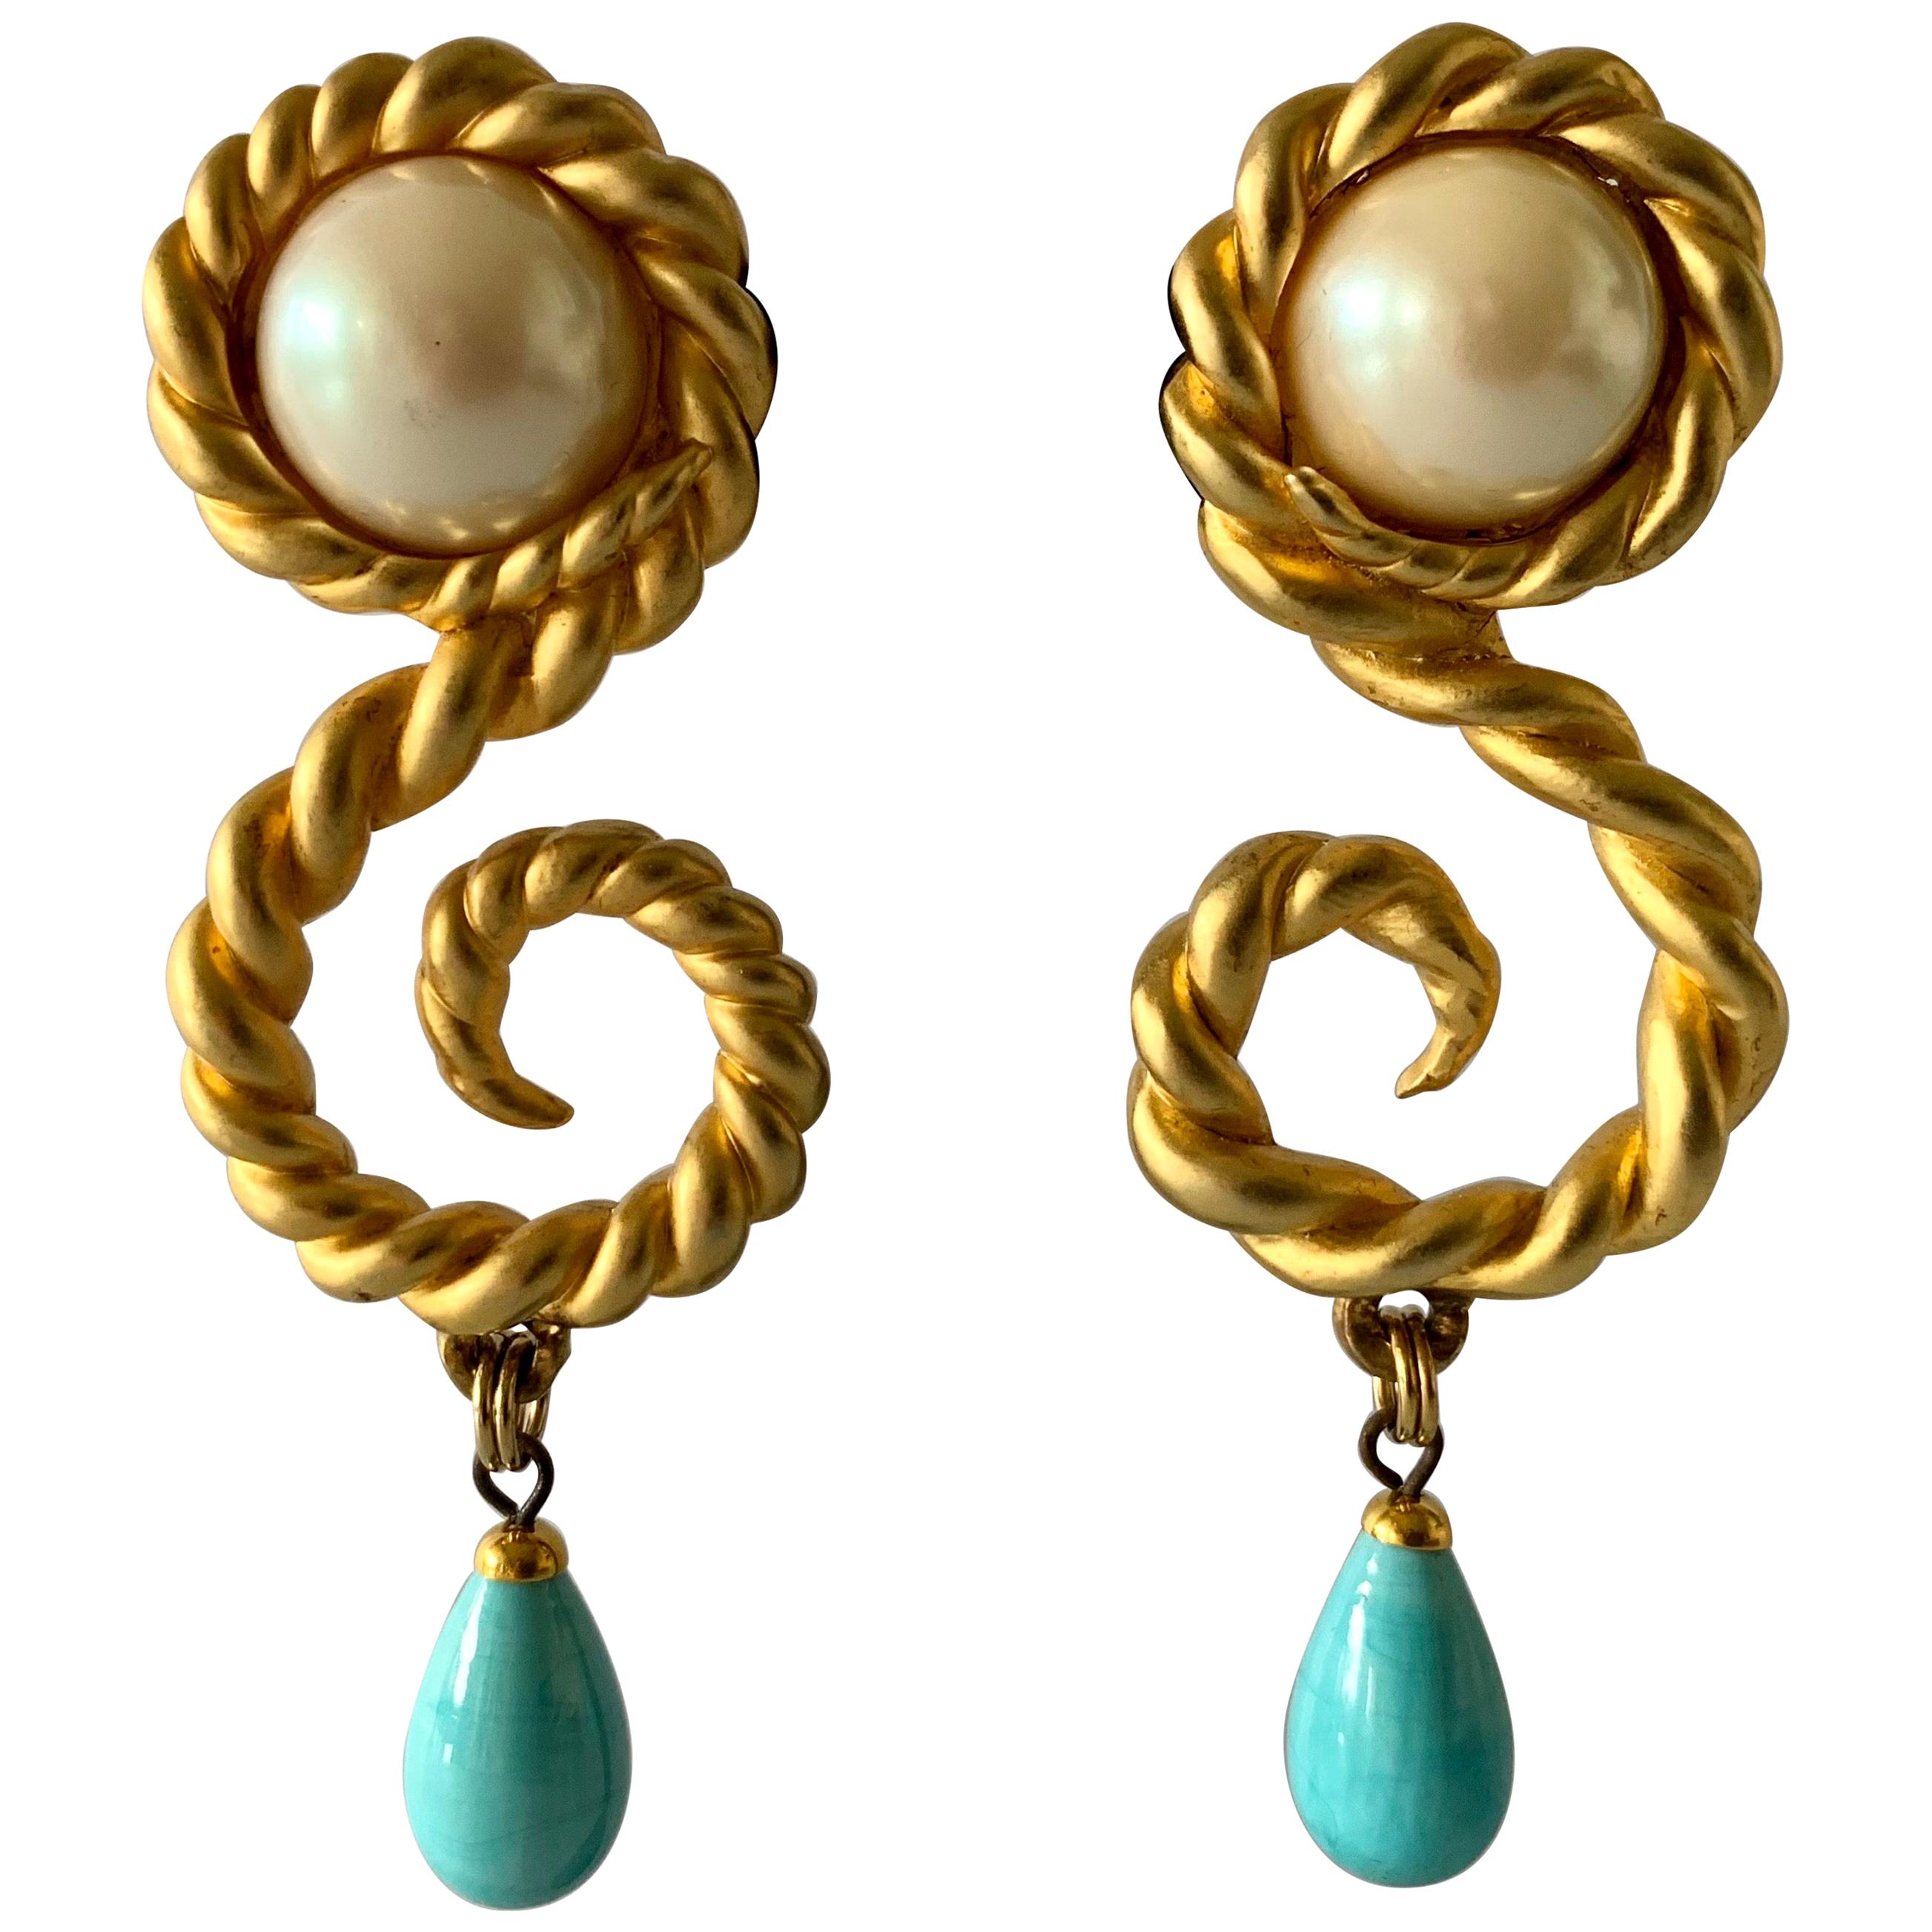 Vintage Chanel  Gold Swirl Pearl and Turquoise Statement Earrings 